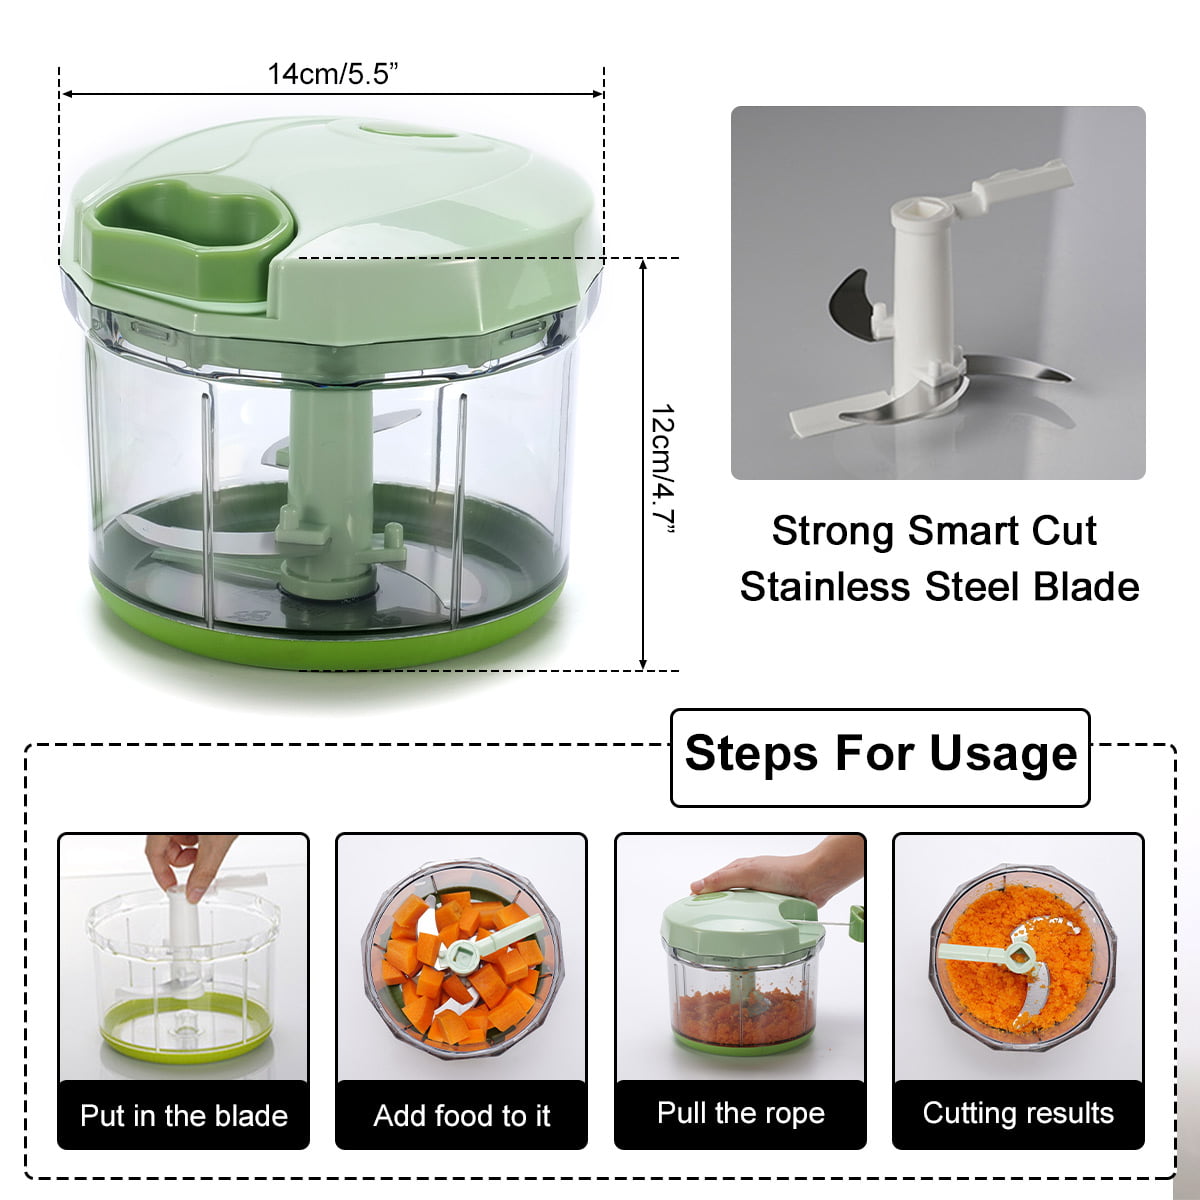 Crank Chop Food Chopper and Processor Deluxe with Japanese Blades - Chop Dice Puree Vegetables Onions Tomatoes Garlic Me